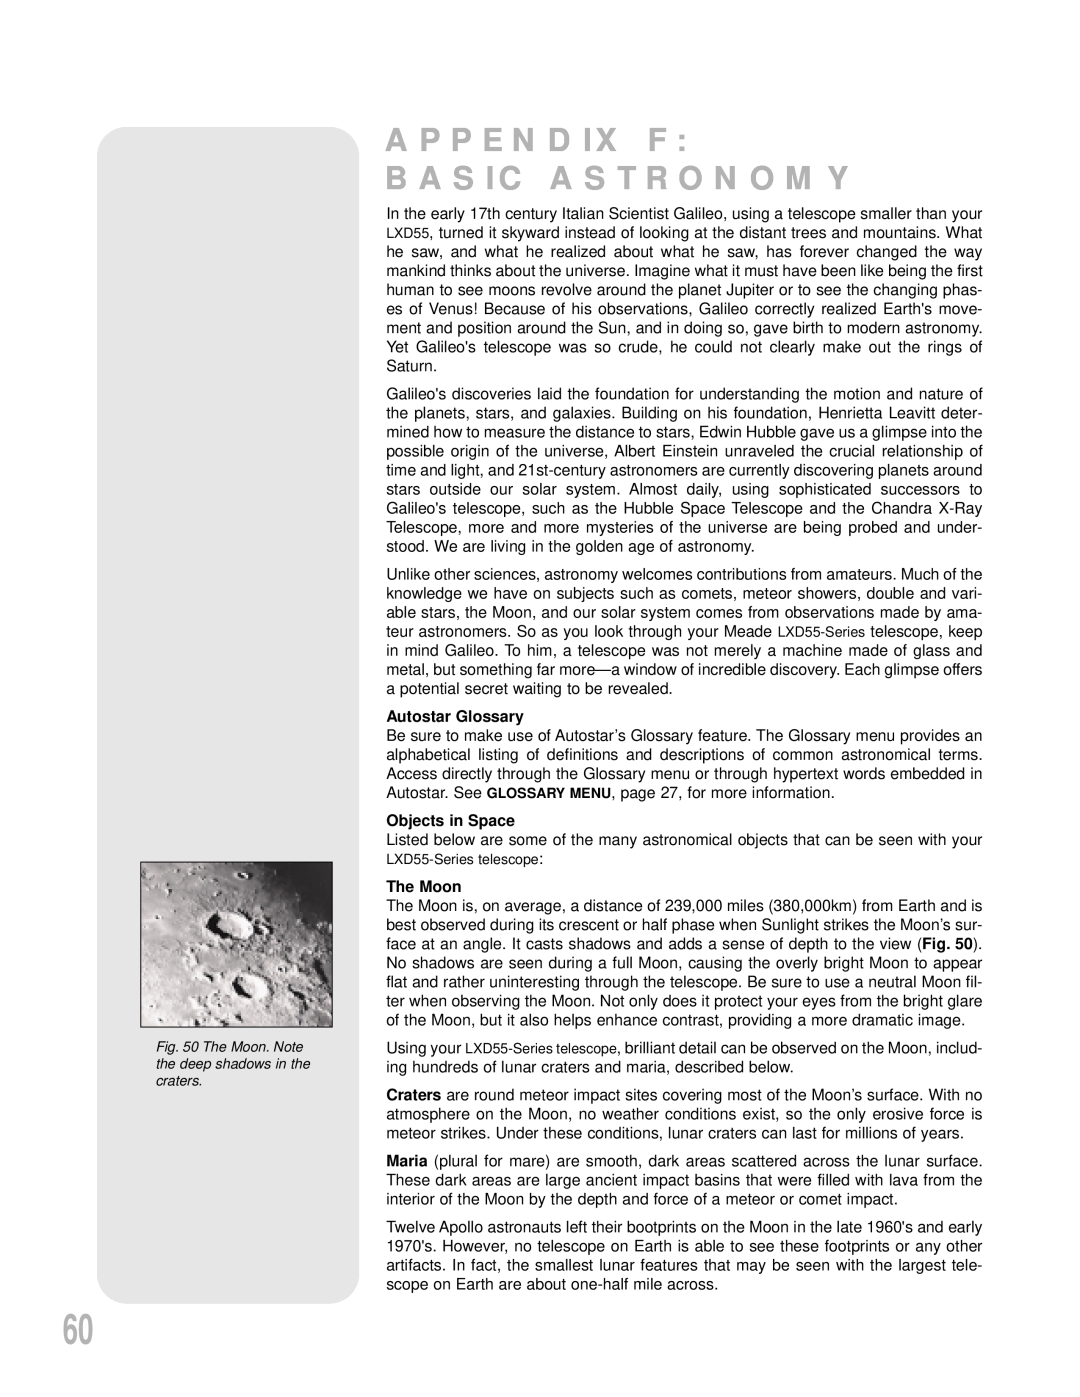 Meade LXD55 instruction manual Appendix F Basic Astronomy, Autostar Glossary, Objects in Space, The Moon 